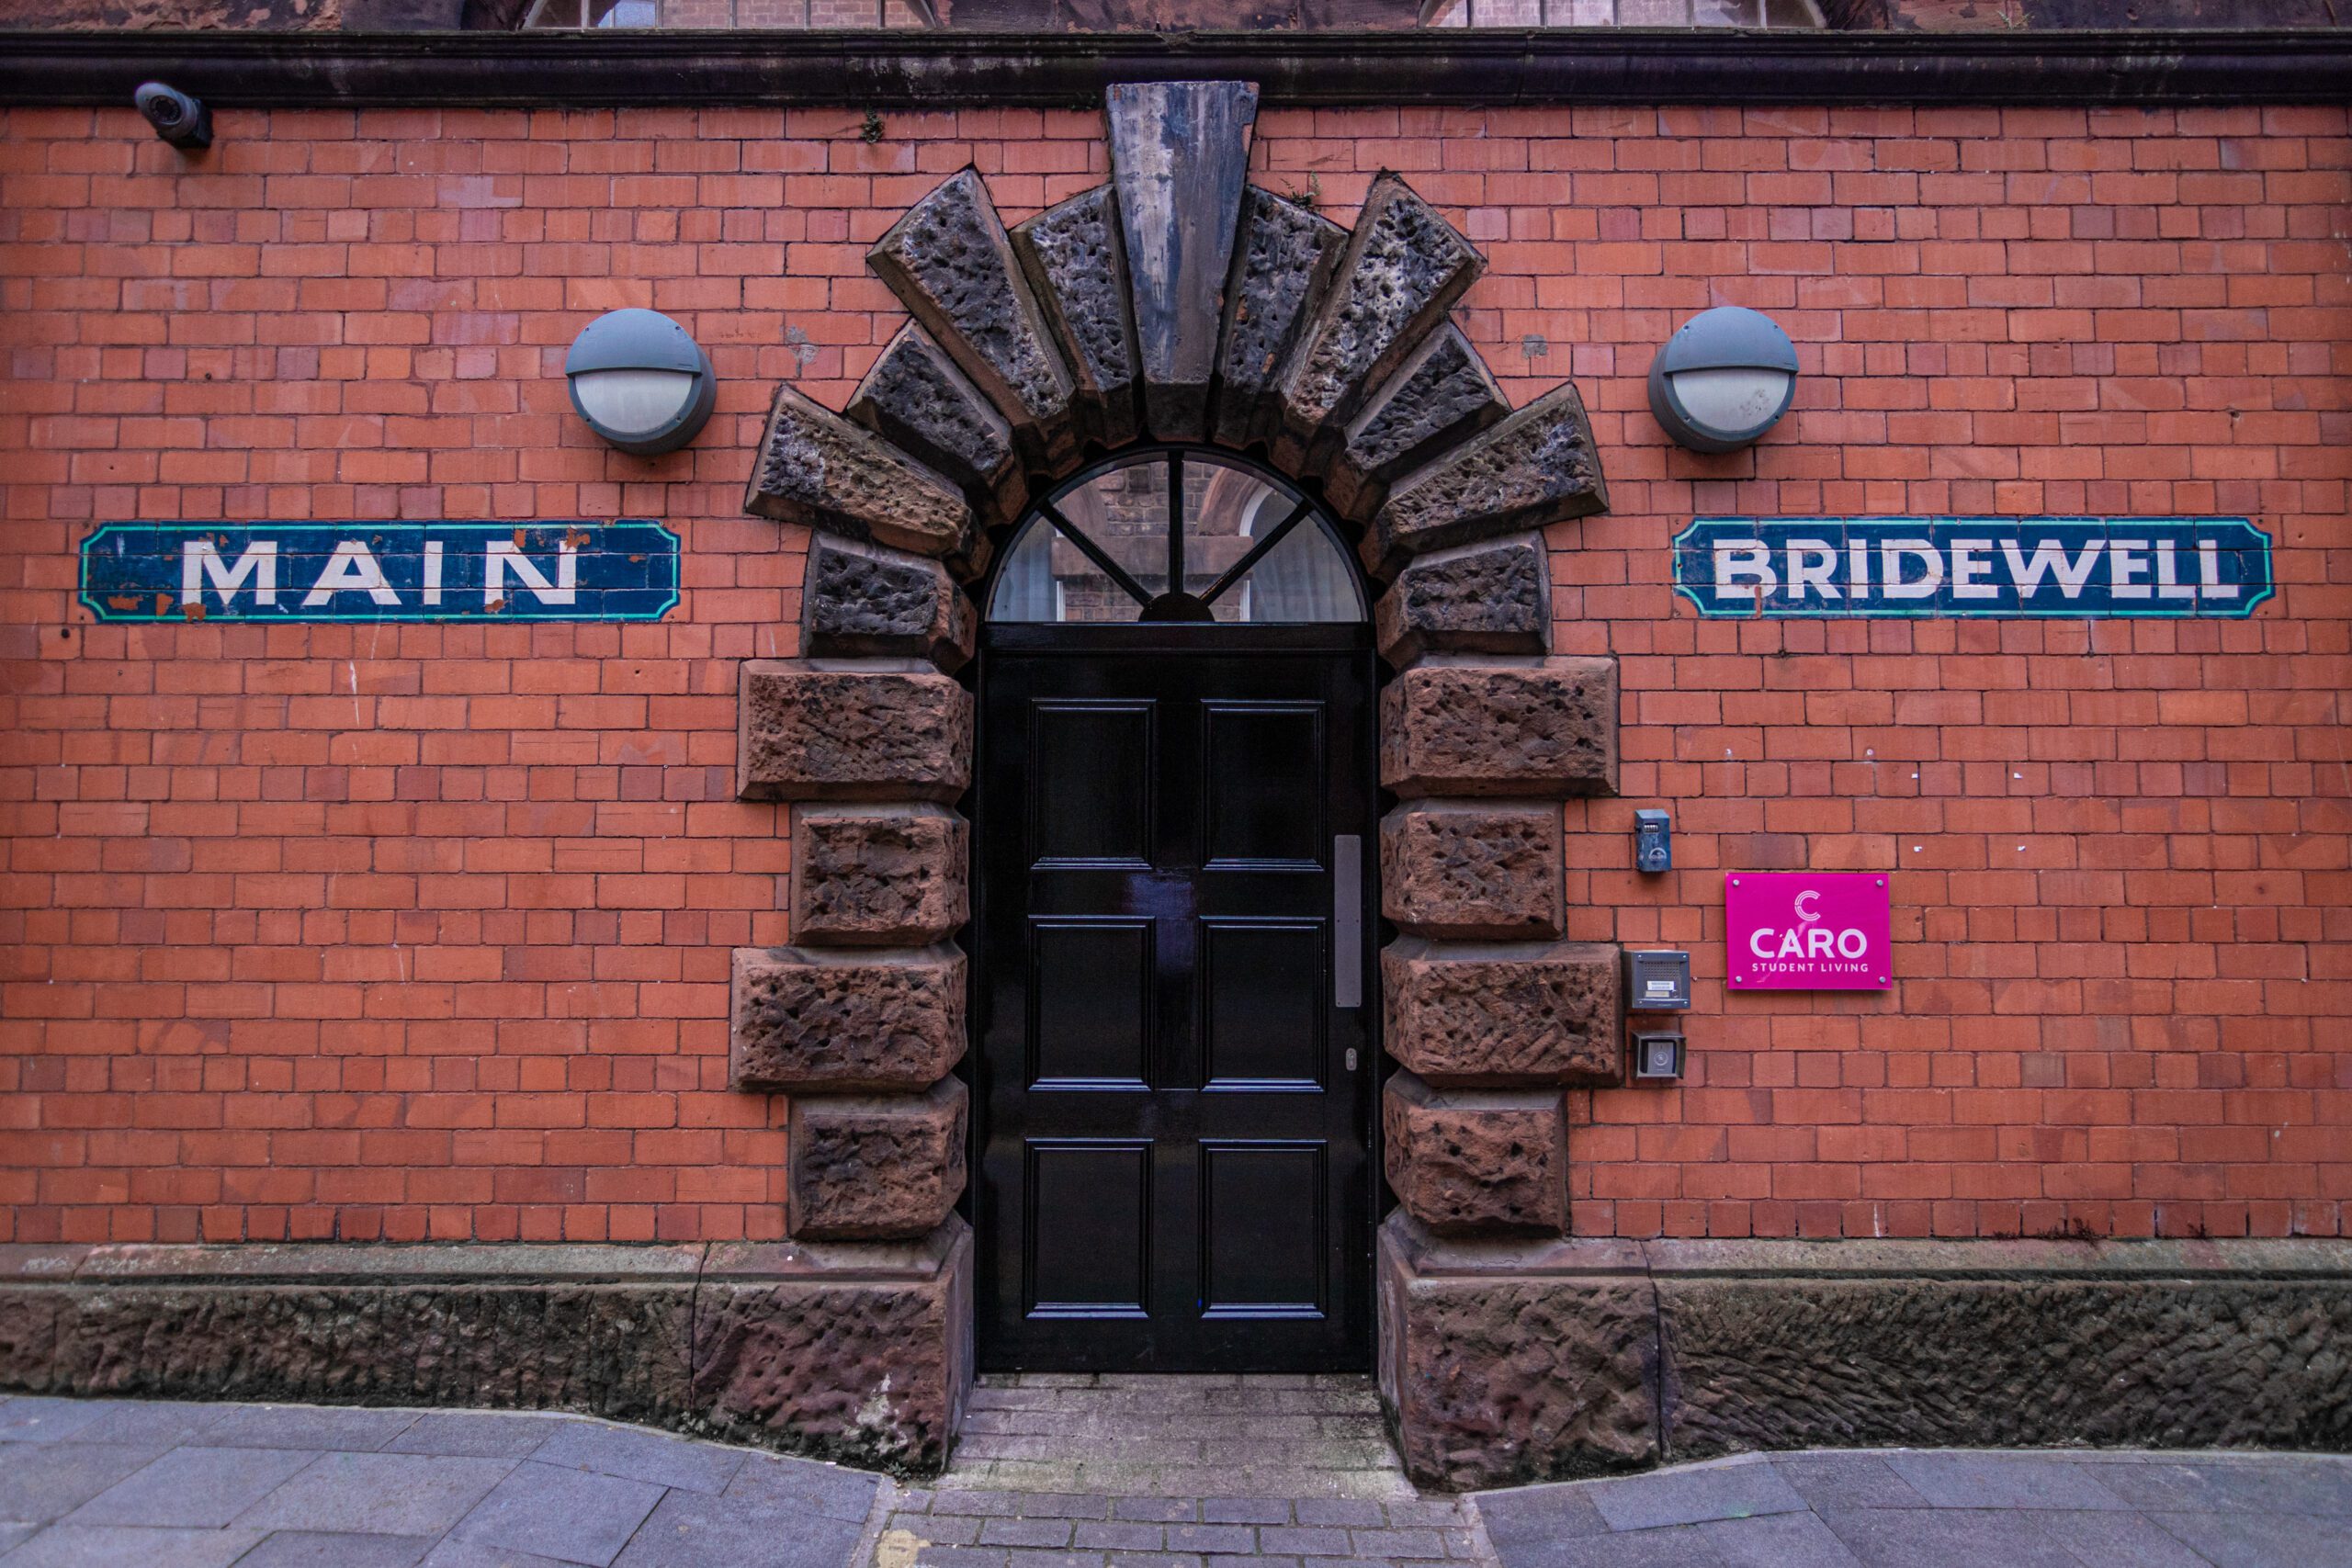 Entrance to The Bridewell - Caro Lettings